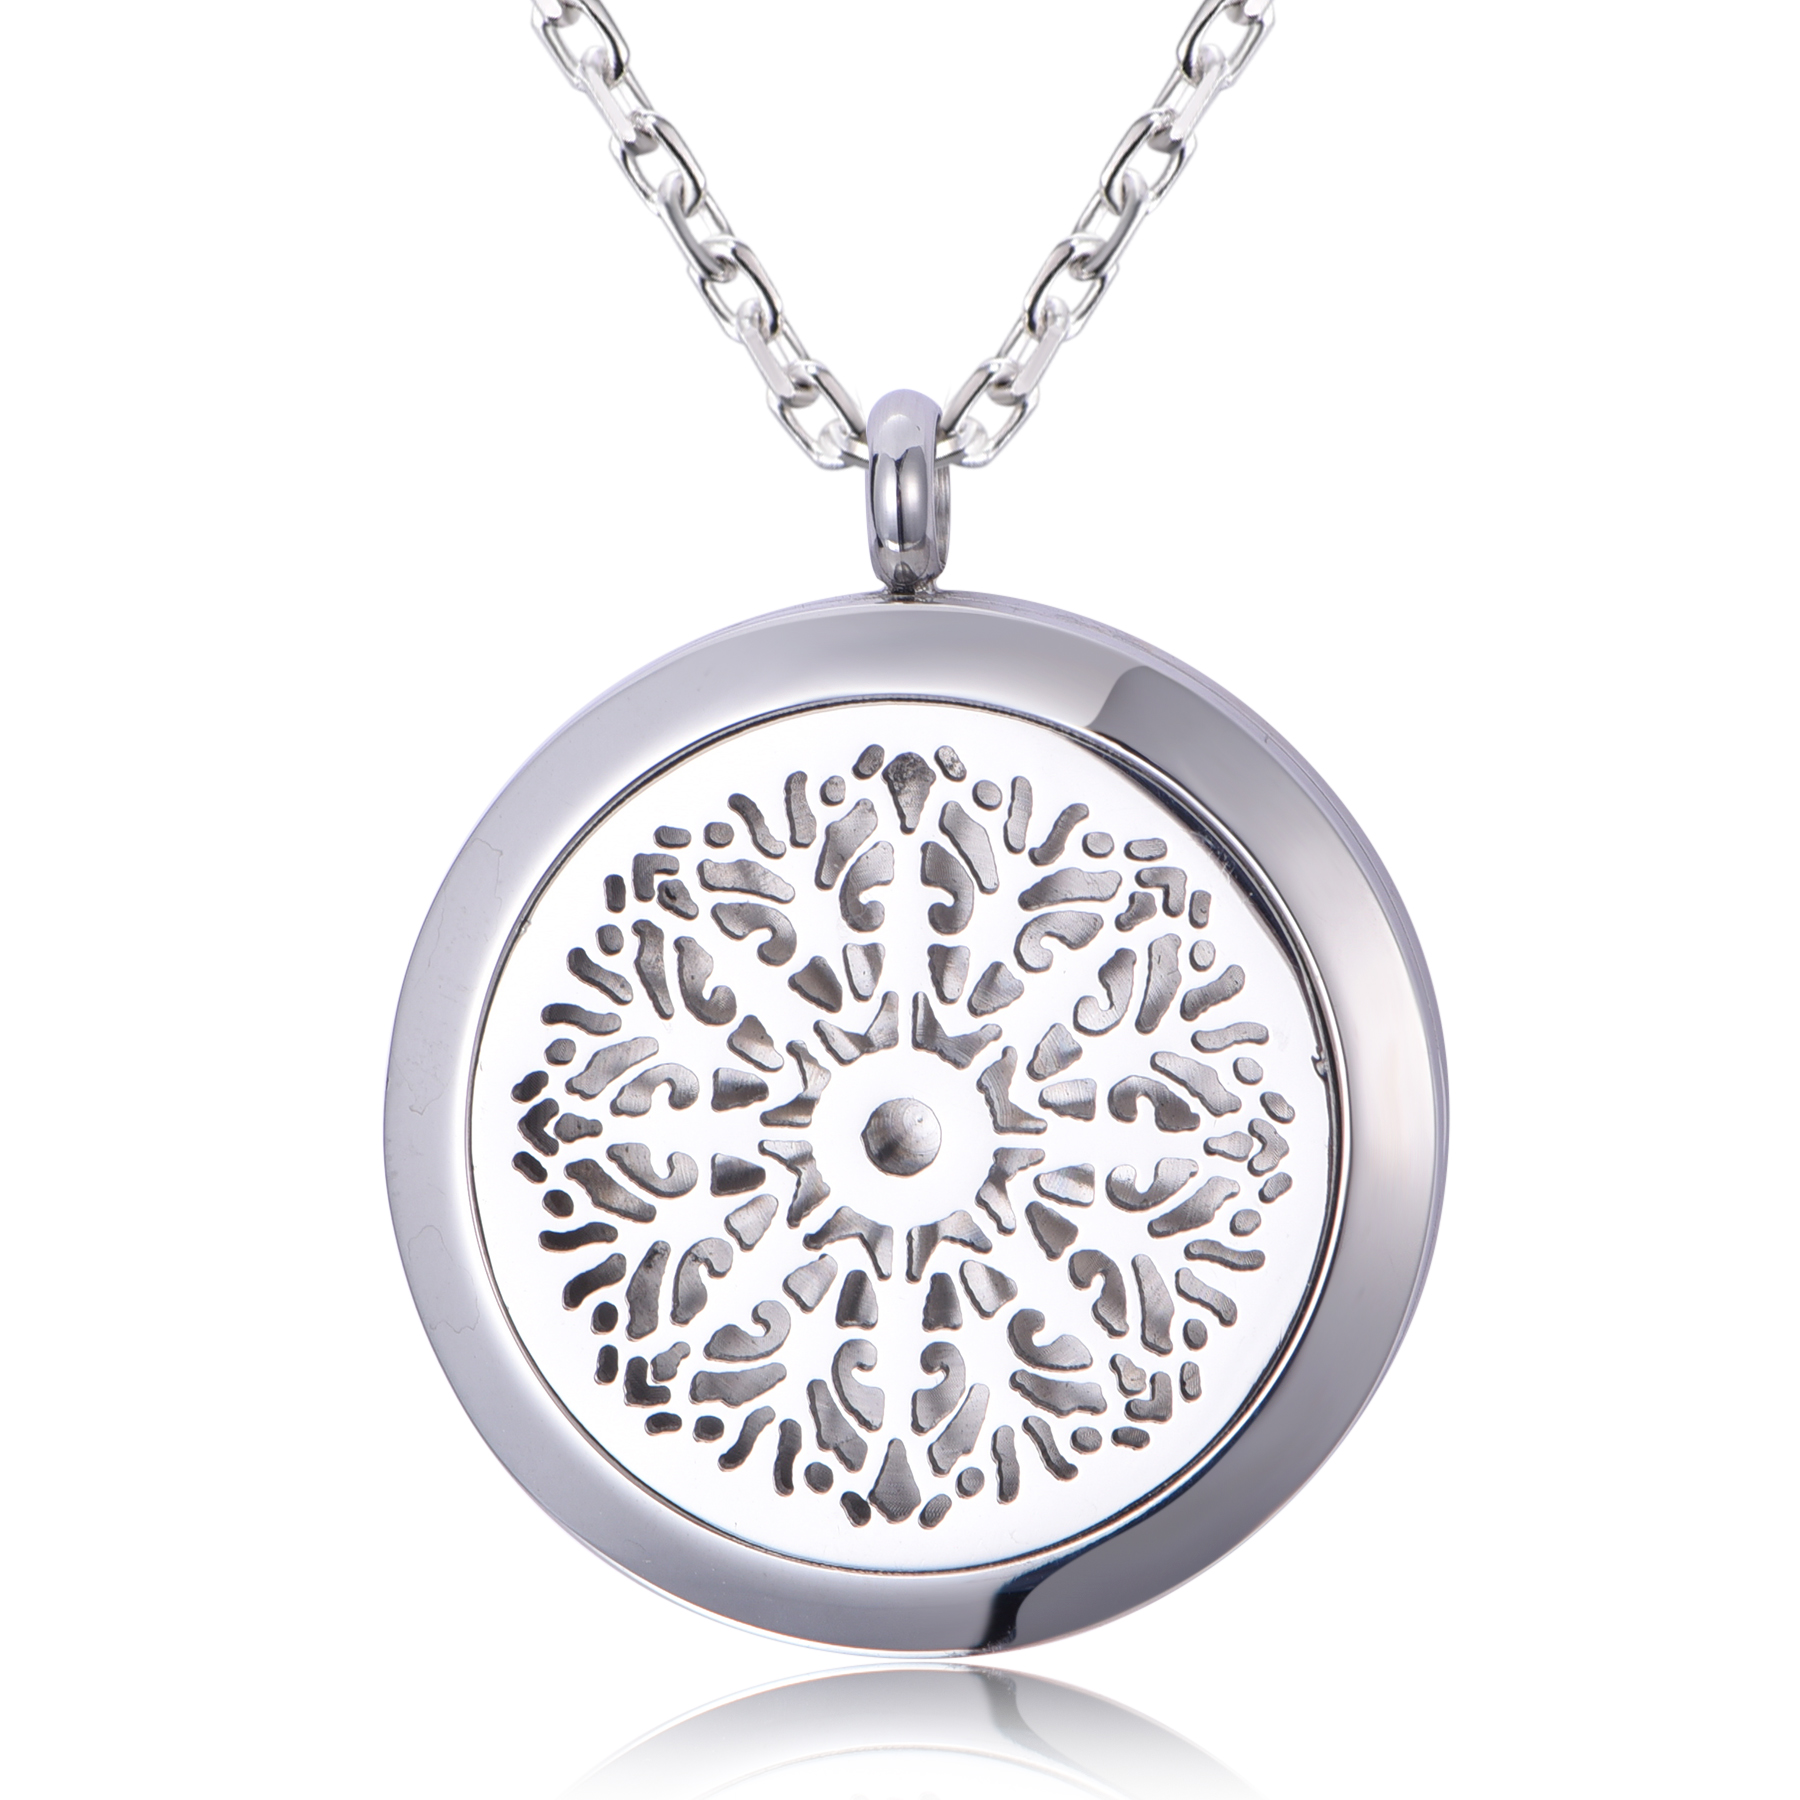 Hot Selling Stainless Steel Snowflake Round Shape Essential Oil Diffuse Pendant Necklace NH9-13